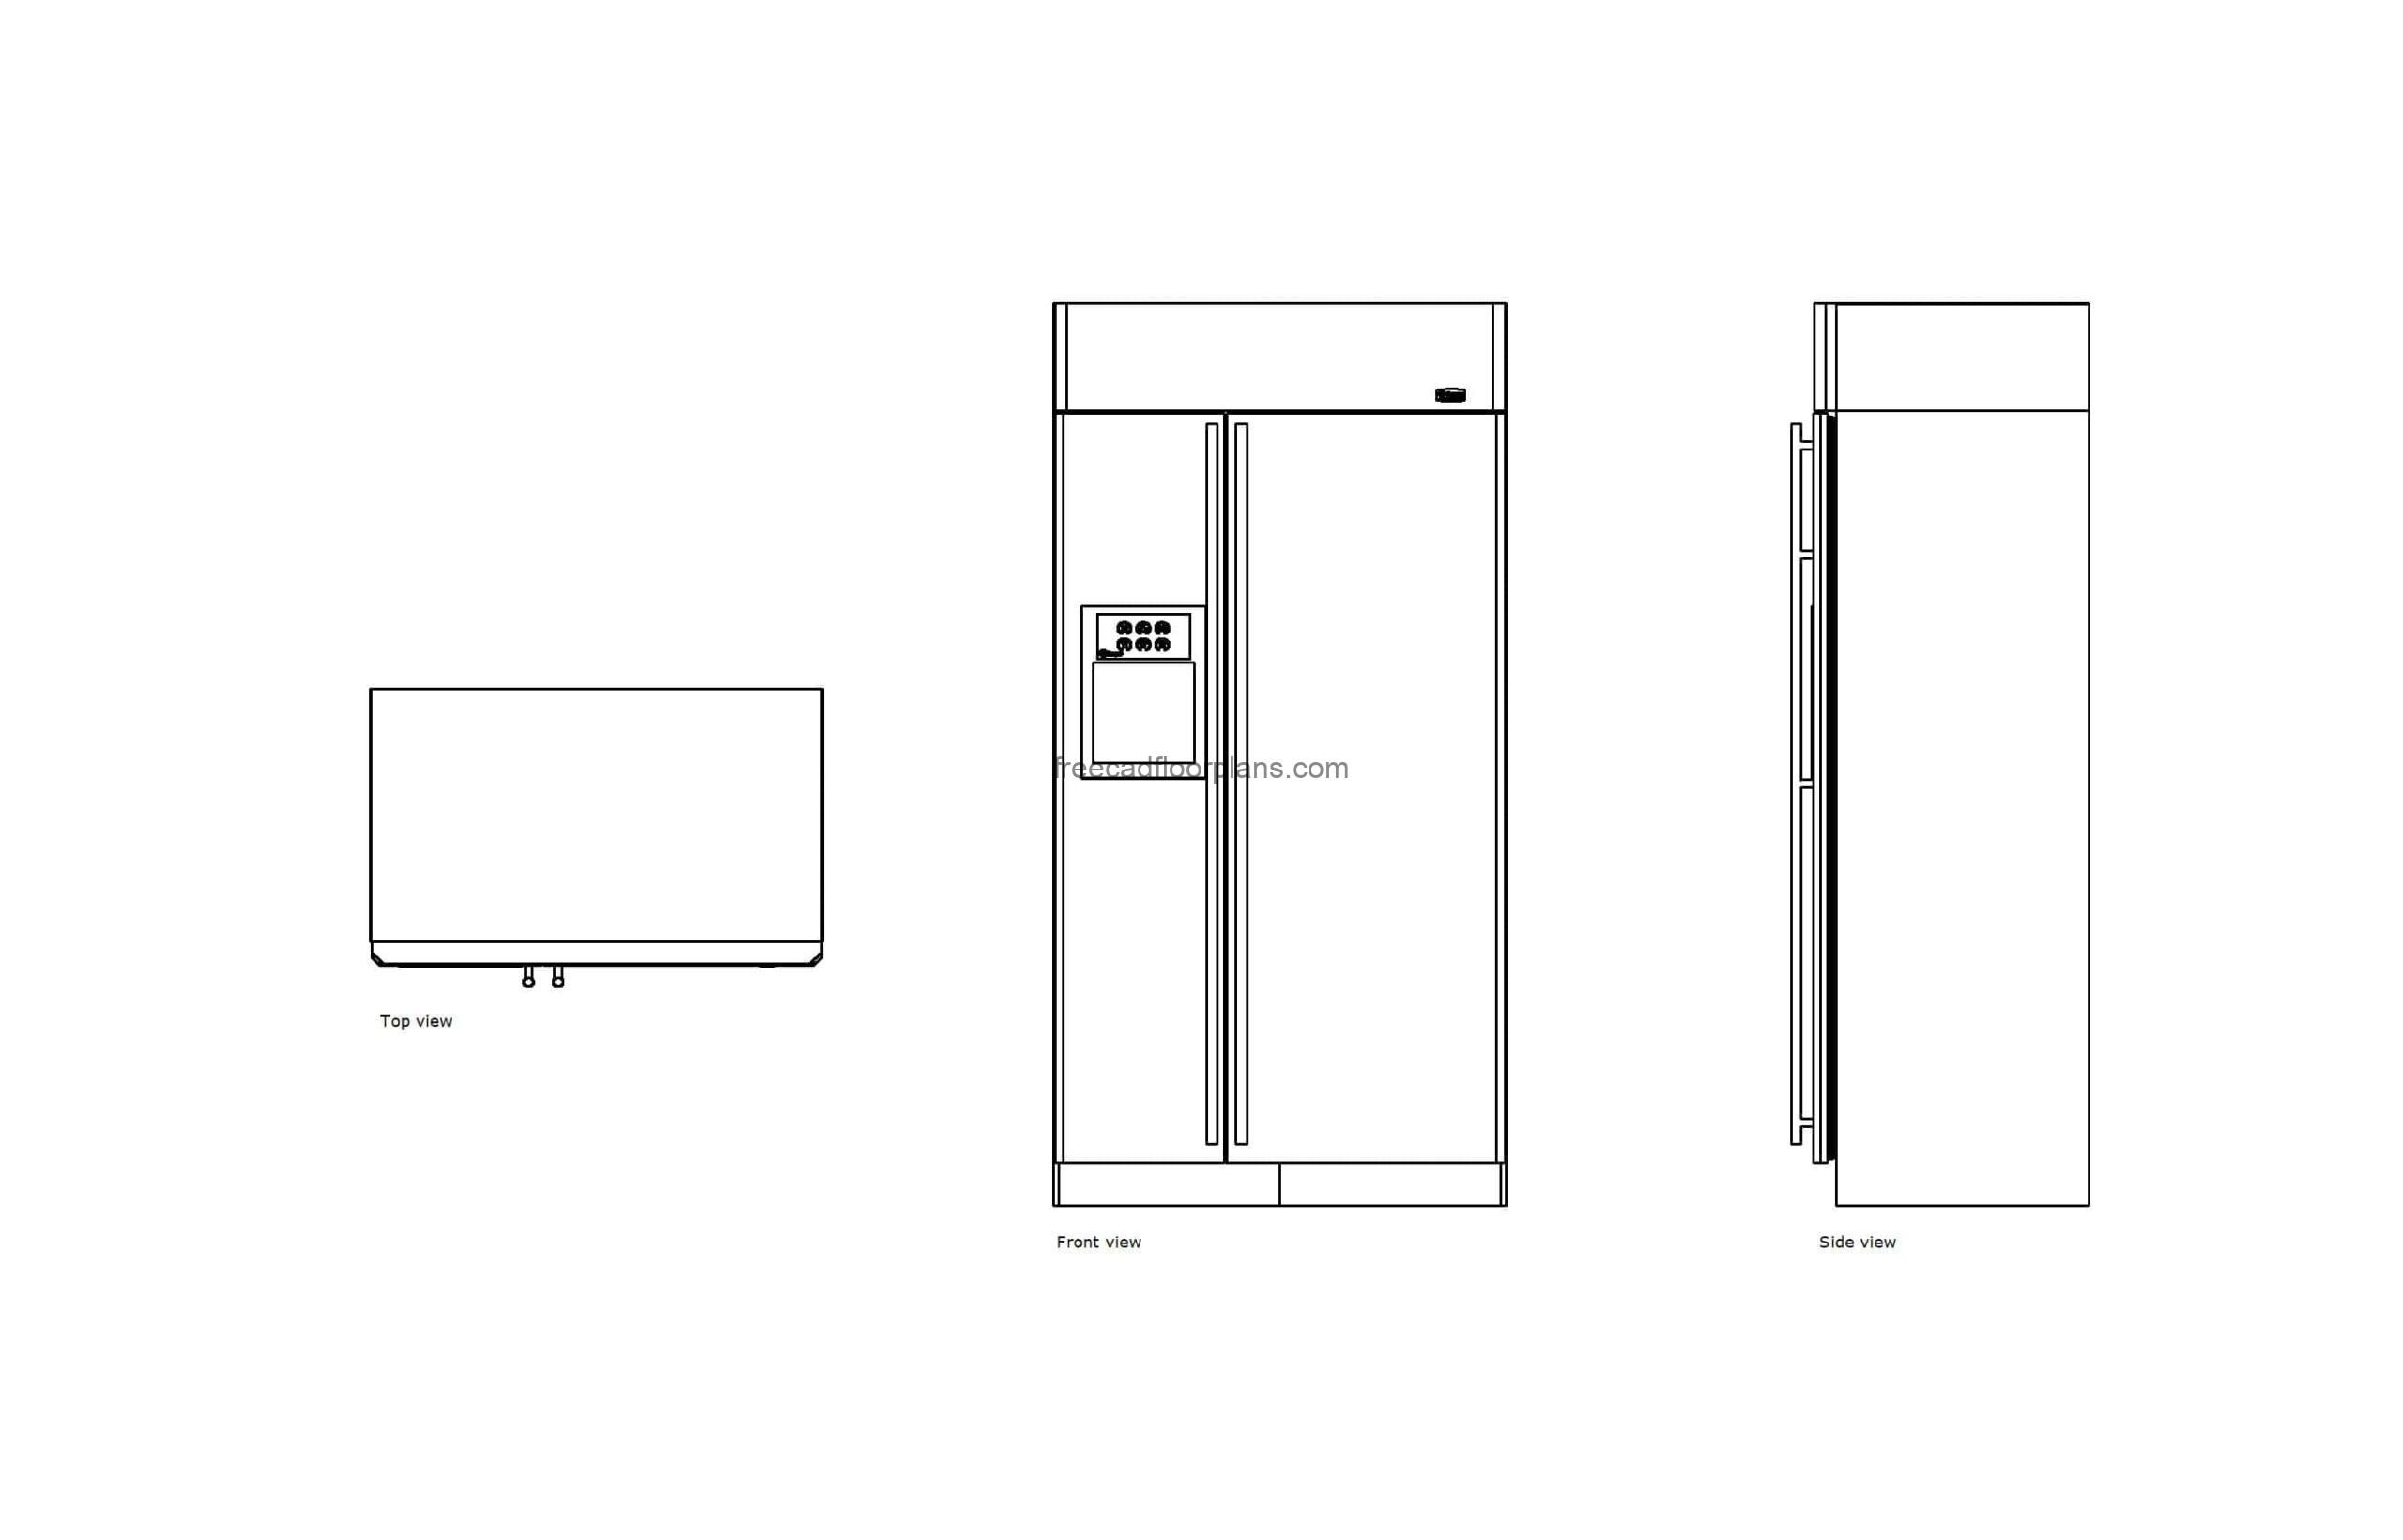 autocad drawing of a GE monogram refrigerator, 2d plan and elevation views, dwg file free for download